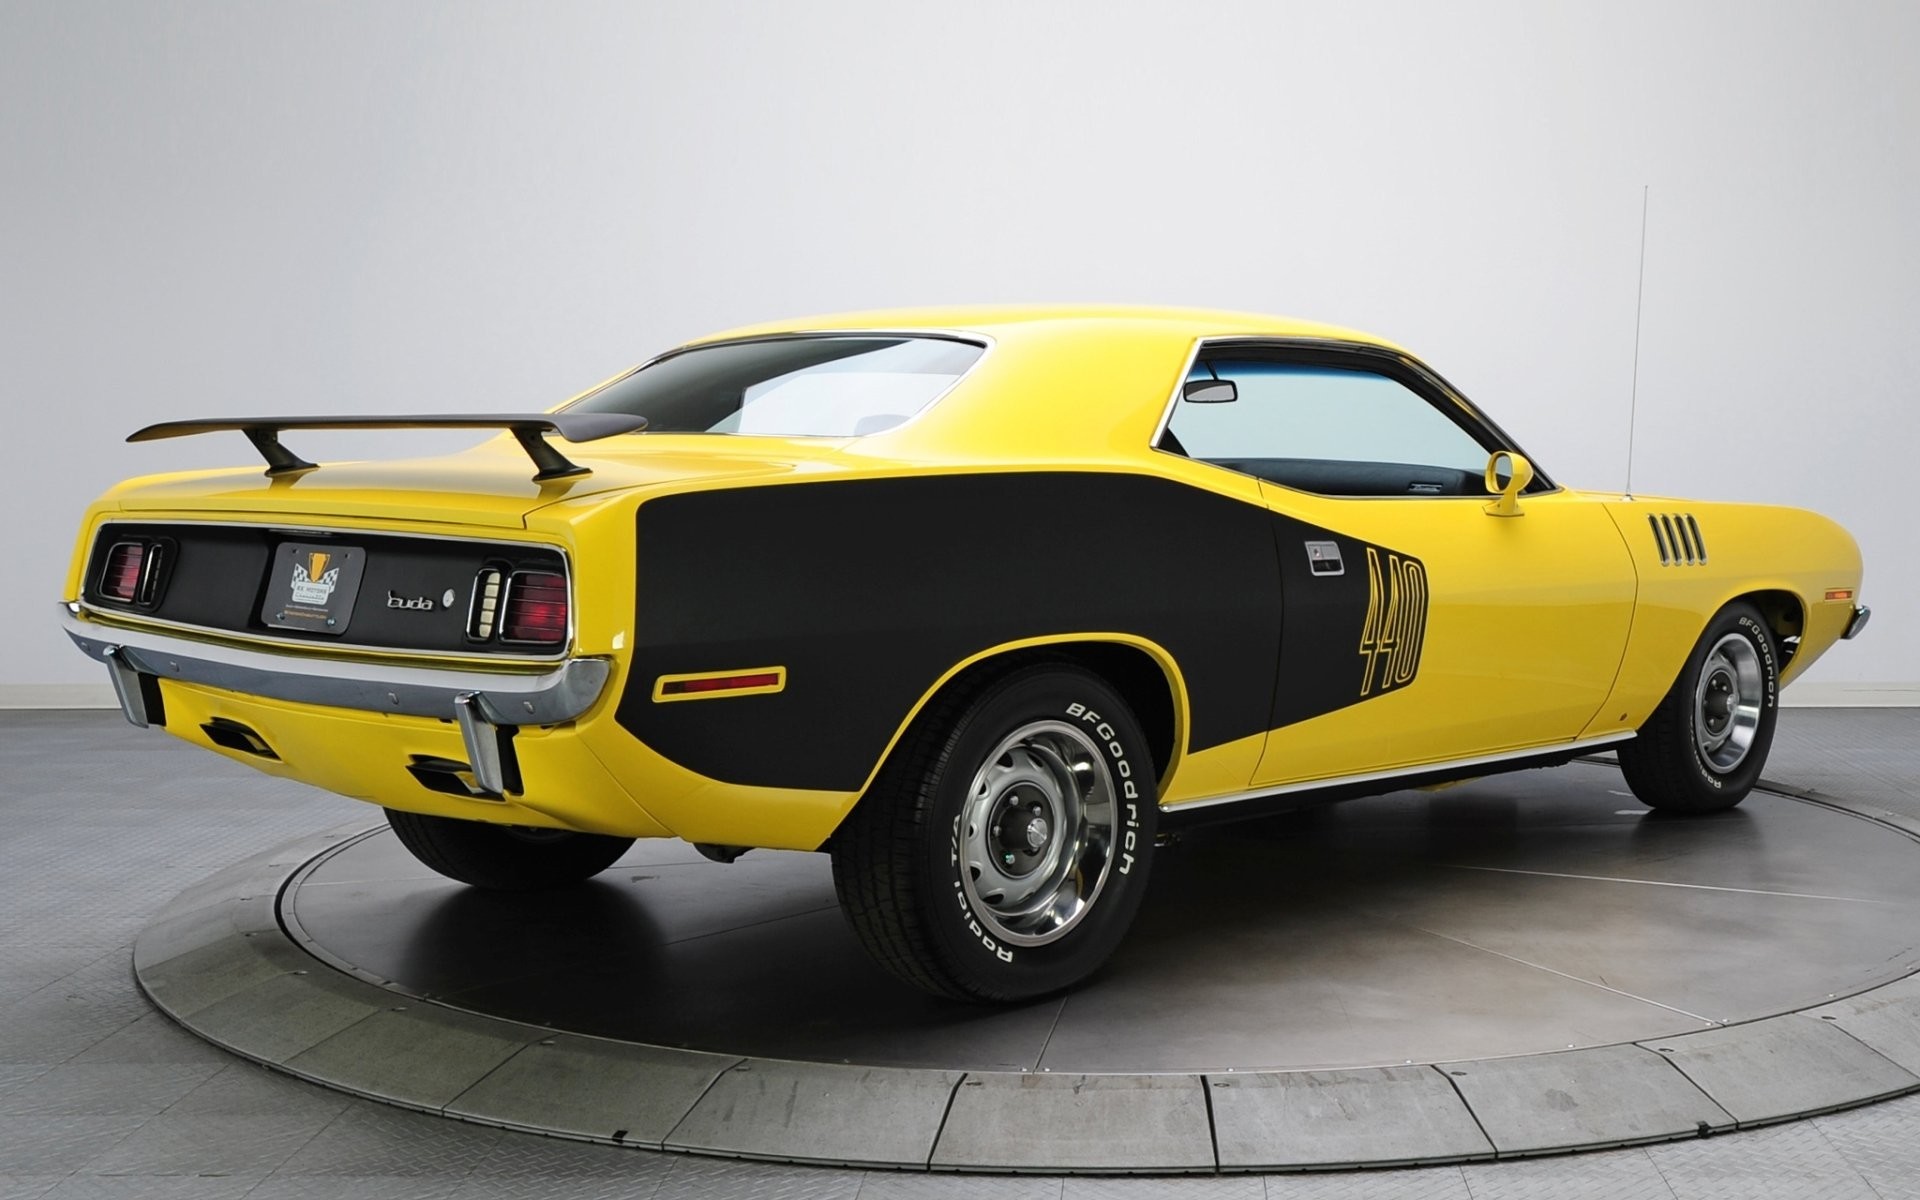 1920x1200 plymouth cuda 1971 plymouth where barracuda rear view muscle car muscle car  yellow background